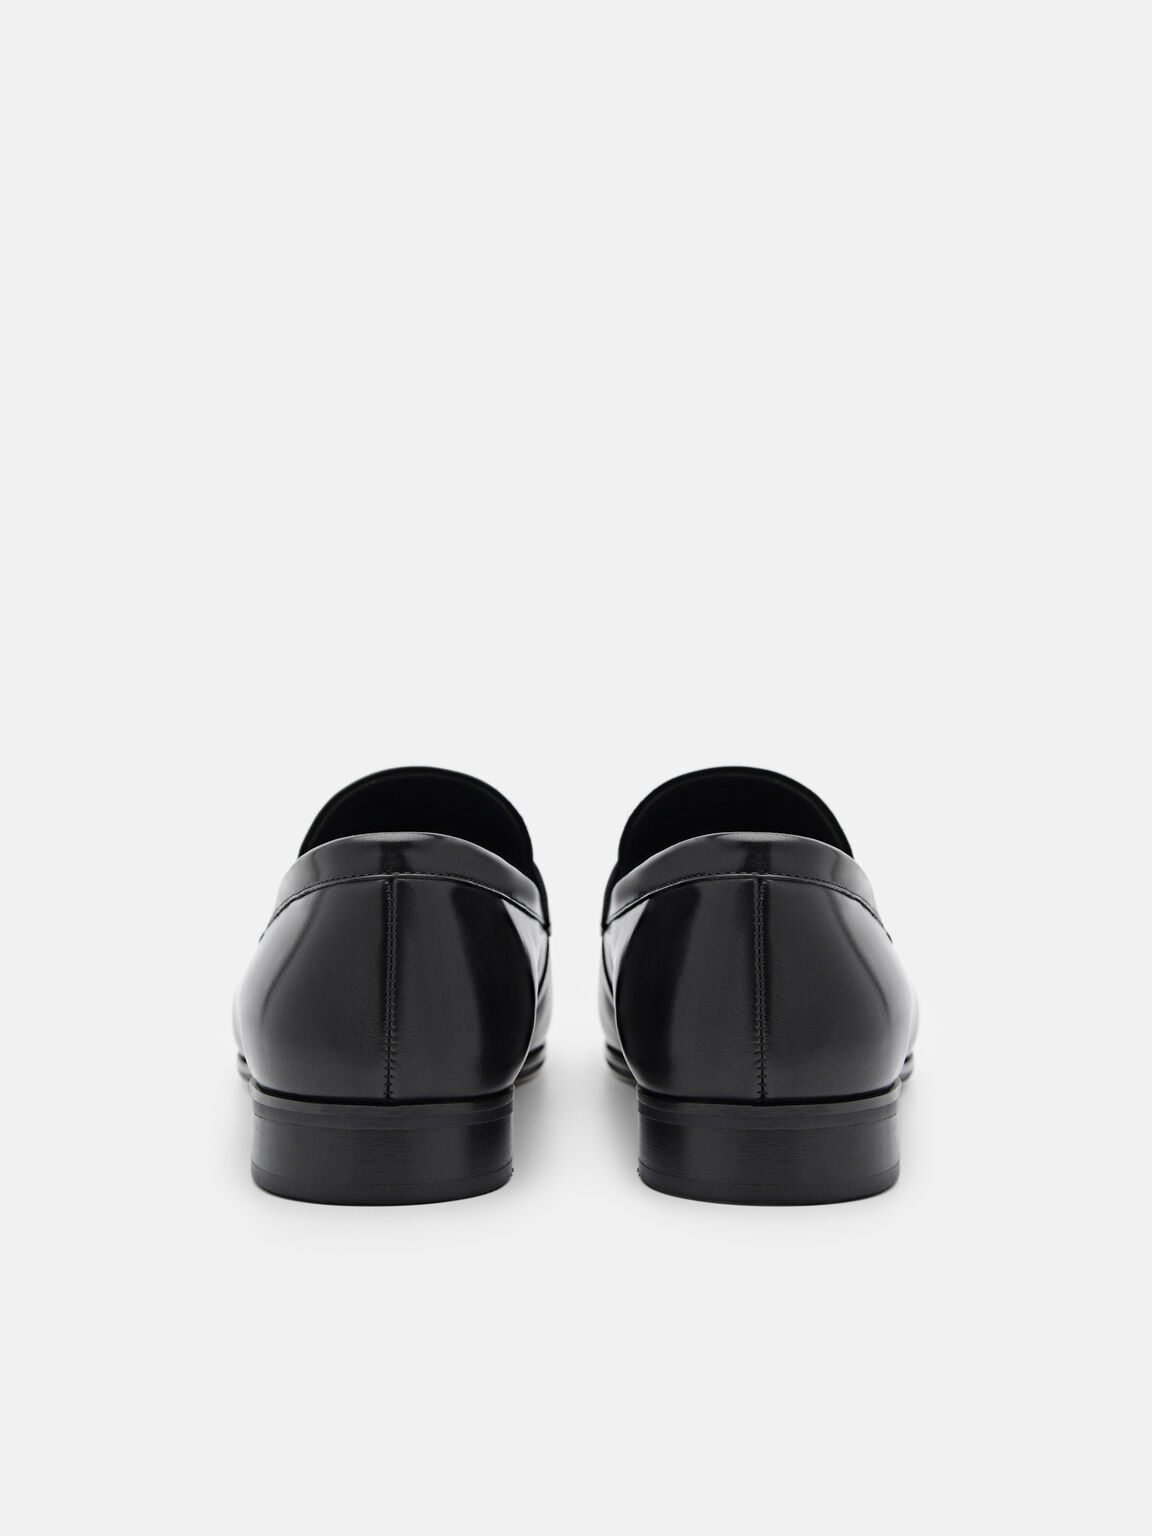 Helix Leather Loafers, Black, hi-res